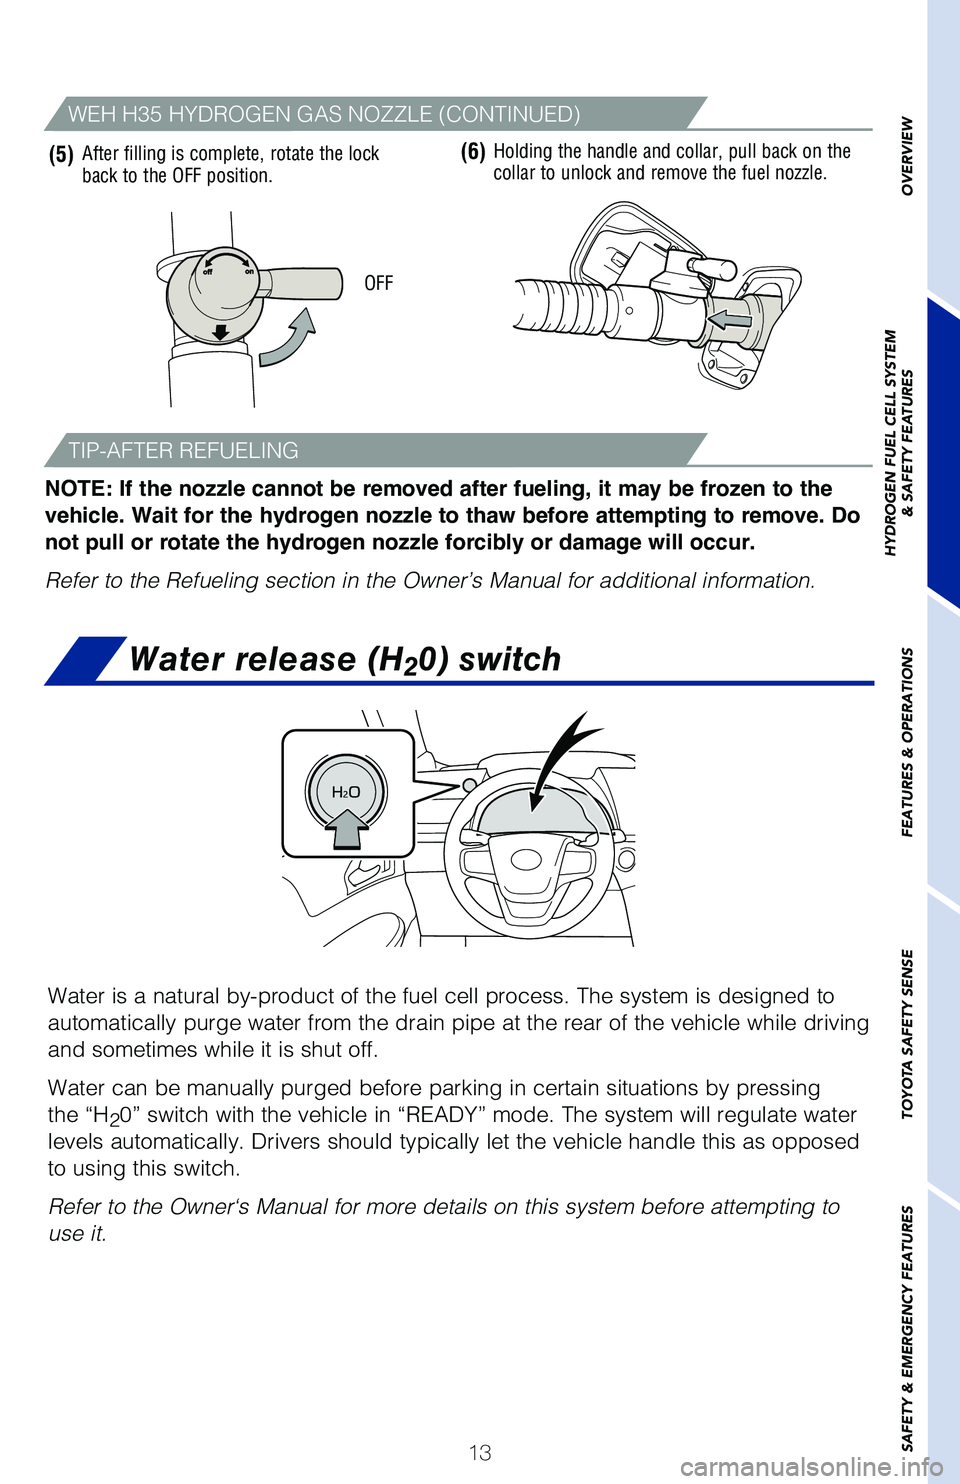 TOYOTA MIRAI 2021  Owners Manual (in English) 13
OVERVIEW
HYDROGEN FUEL CELL SYSTEM
& SAFETY FEATURES
FEATURES & OPERATIONS
TOYOTA SAFETY SENSE
SAFETY & EMERGENCY FEATURES
Water is a natural by-product of the fuel cell process. The system is de\
